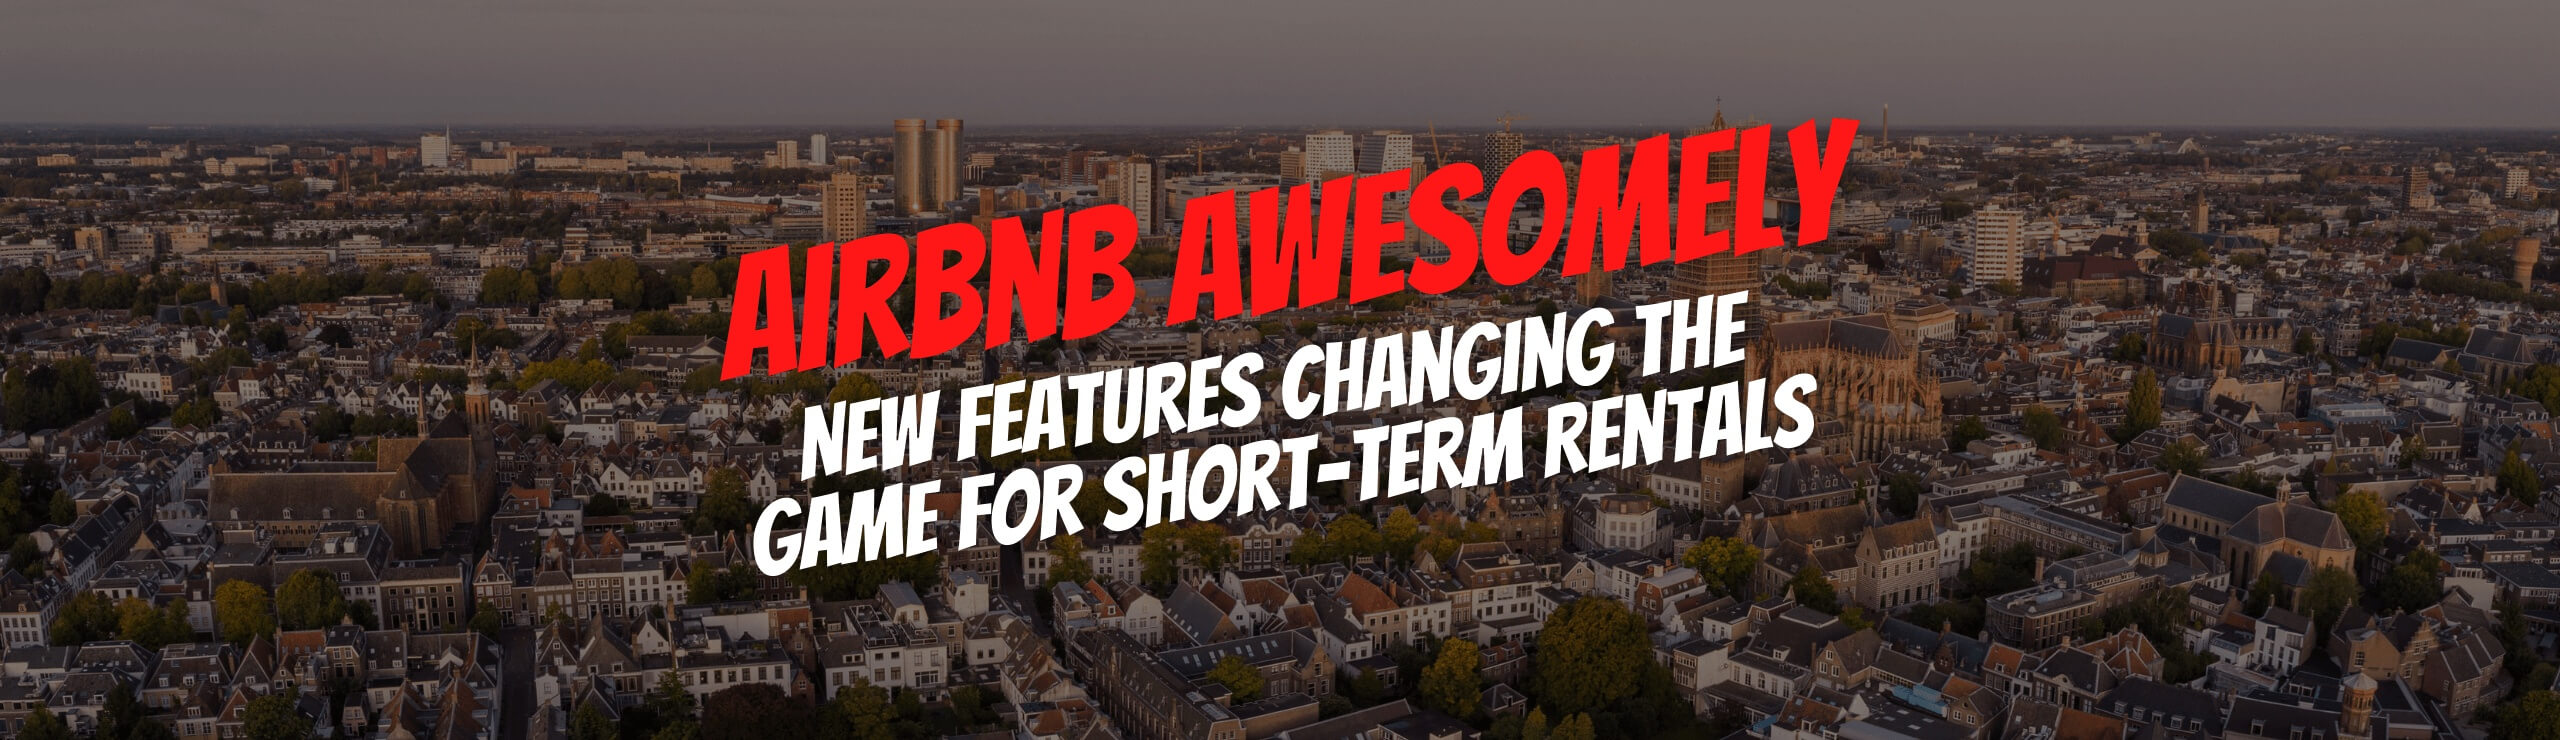 Airbnb Awesomely: New Features Changing the Game for Short-Term Rentals